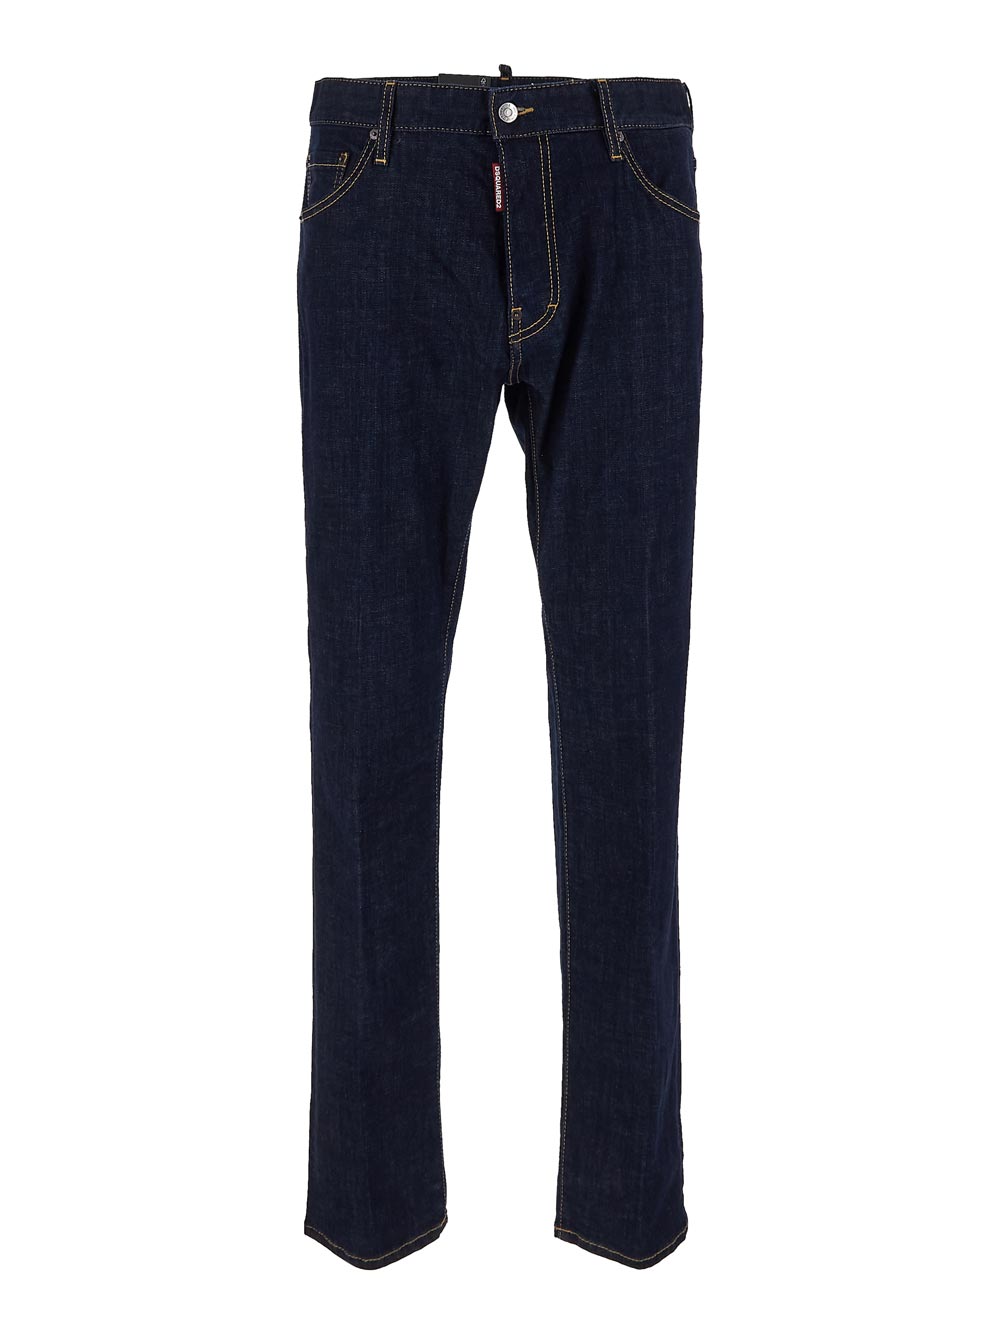 Dsquared2 Dark Rinse Wash Cool Guy Jeans